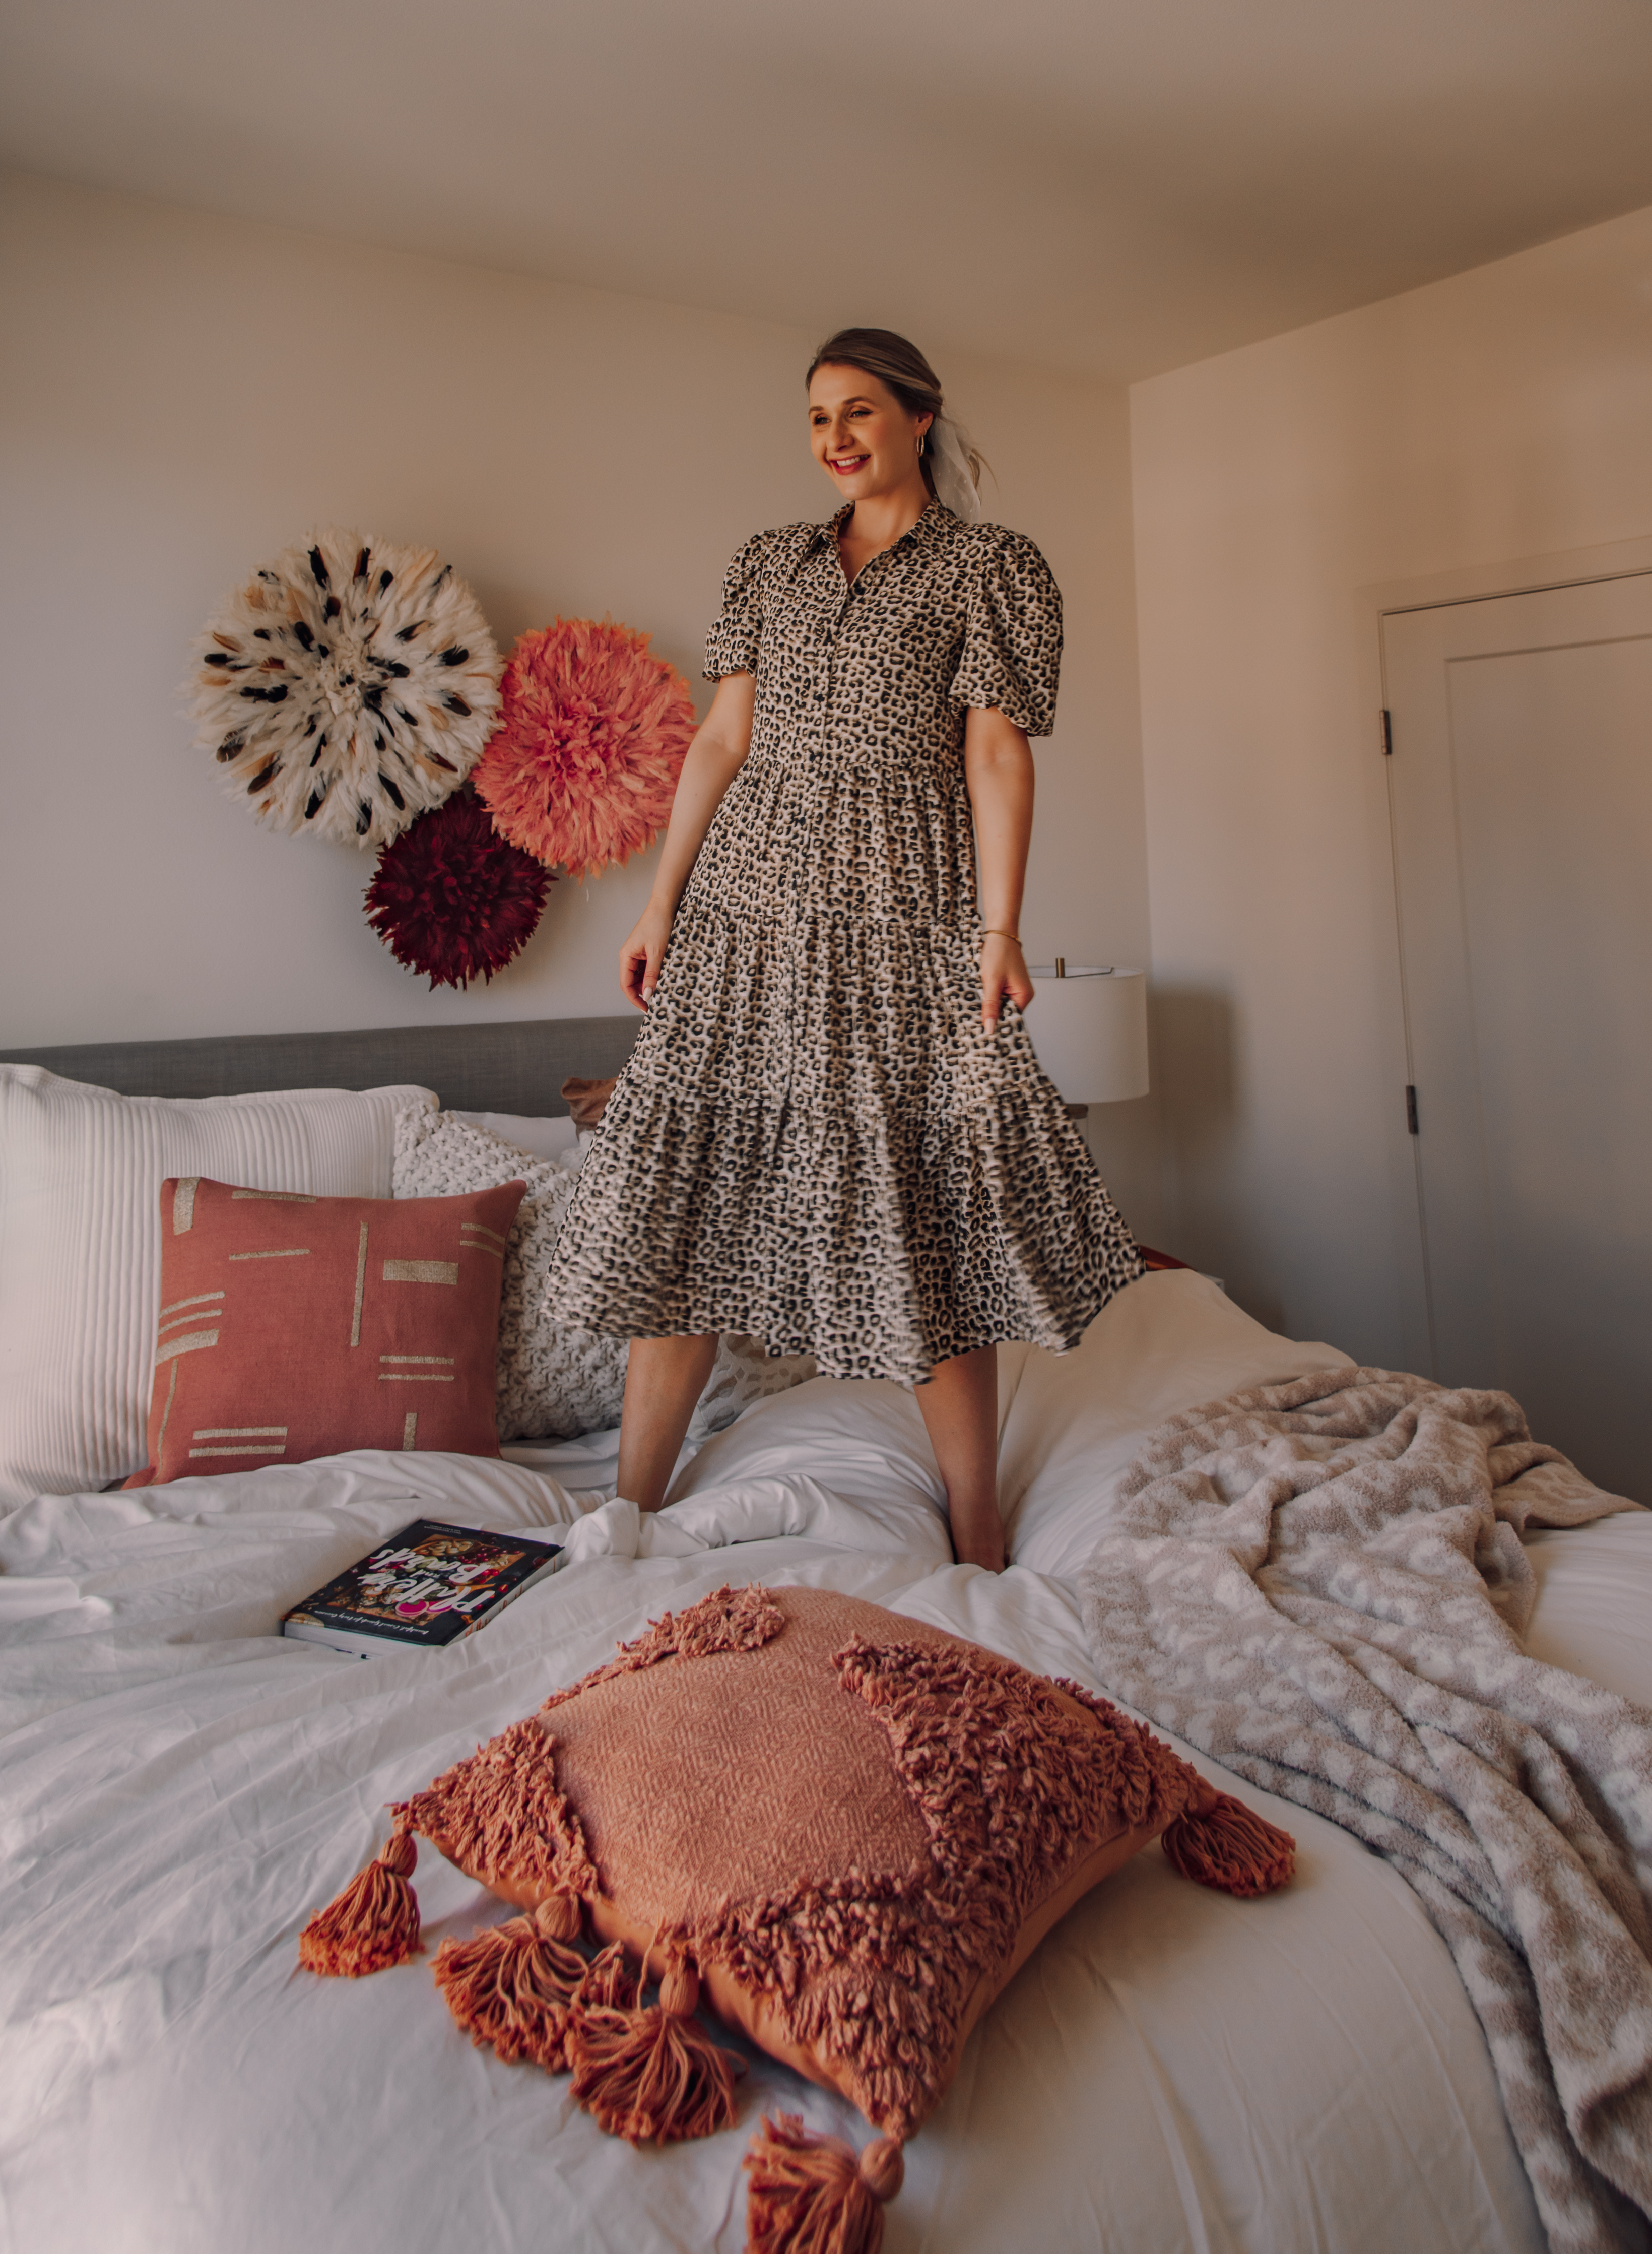 How to style a leopard print dress